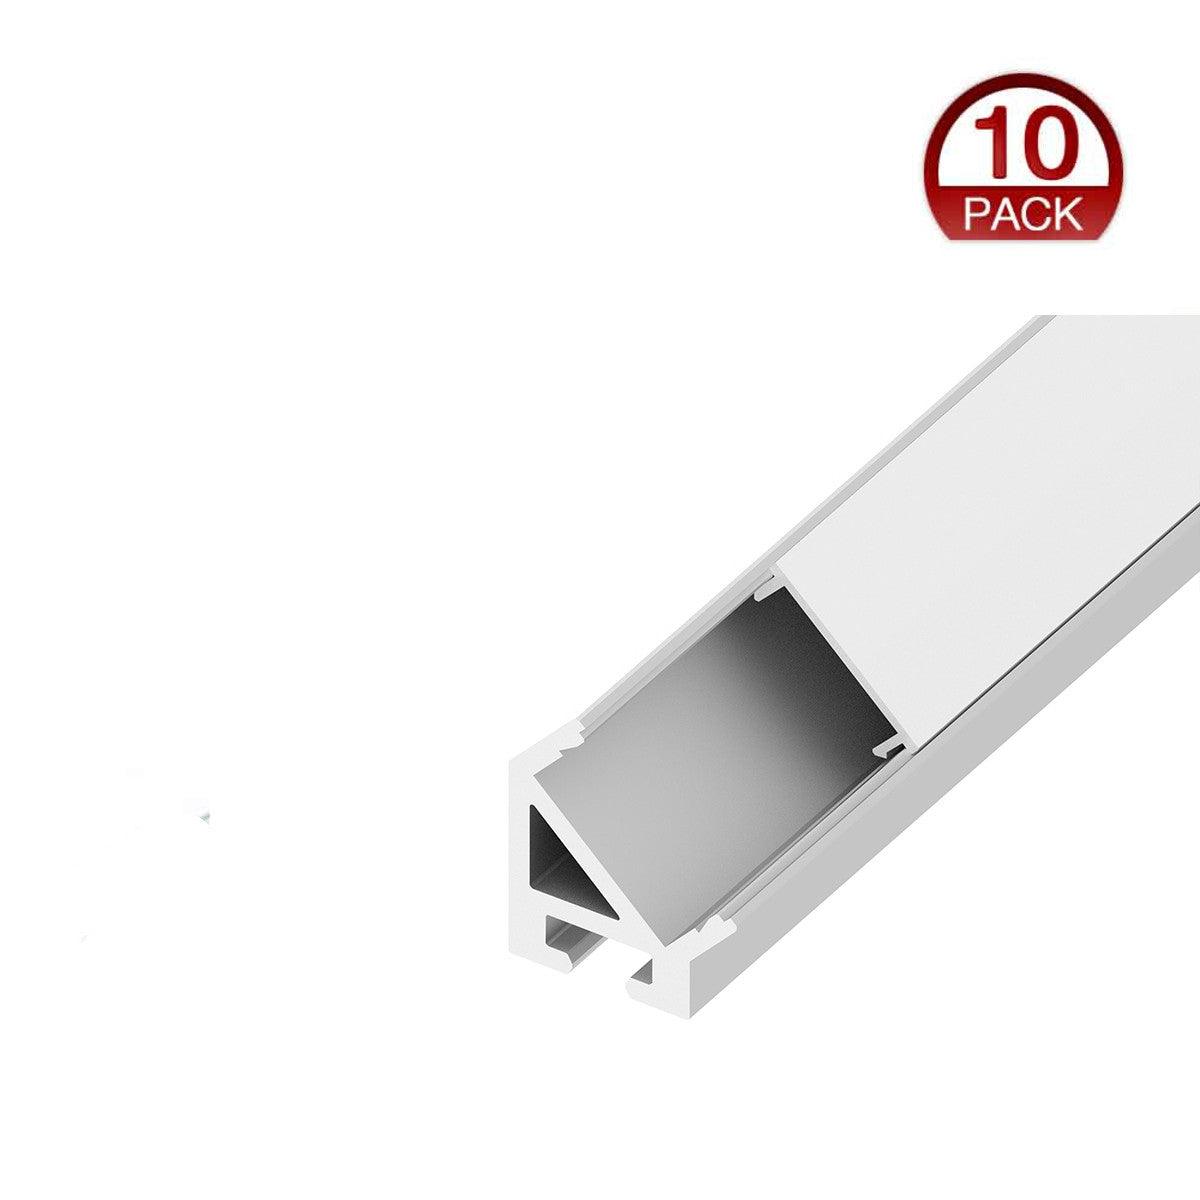 96in. Chromapath Builder, 45 degree LED Aluminum channel, Corner, for Strips Up To 12mm, Pack of 10